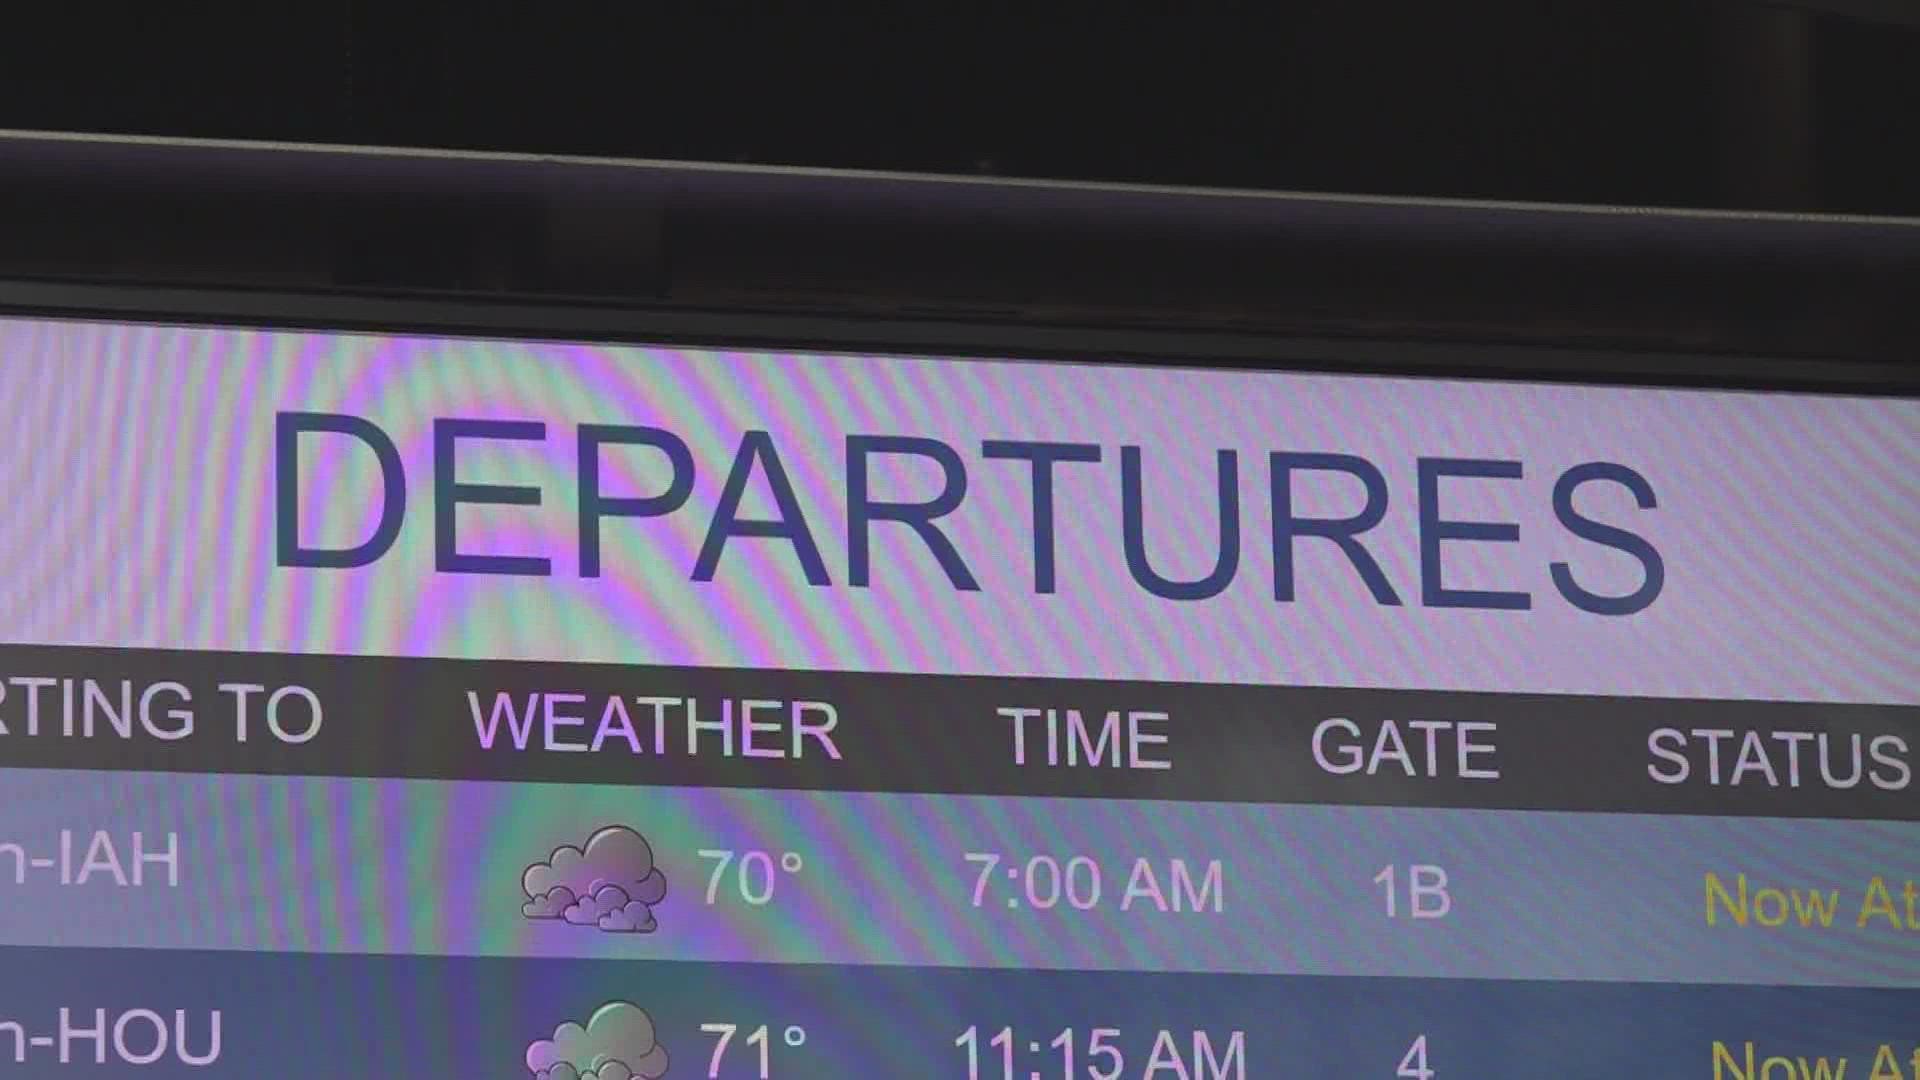 Many flights were delayed and a few were cancelled. Some travelers were worried about missing their connection.